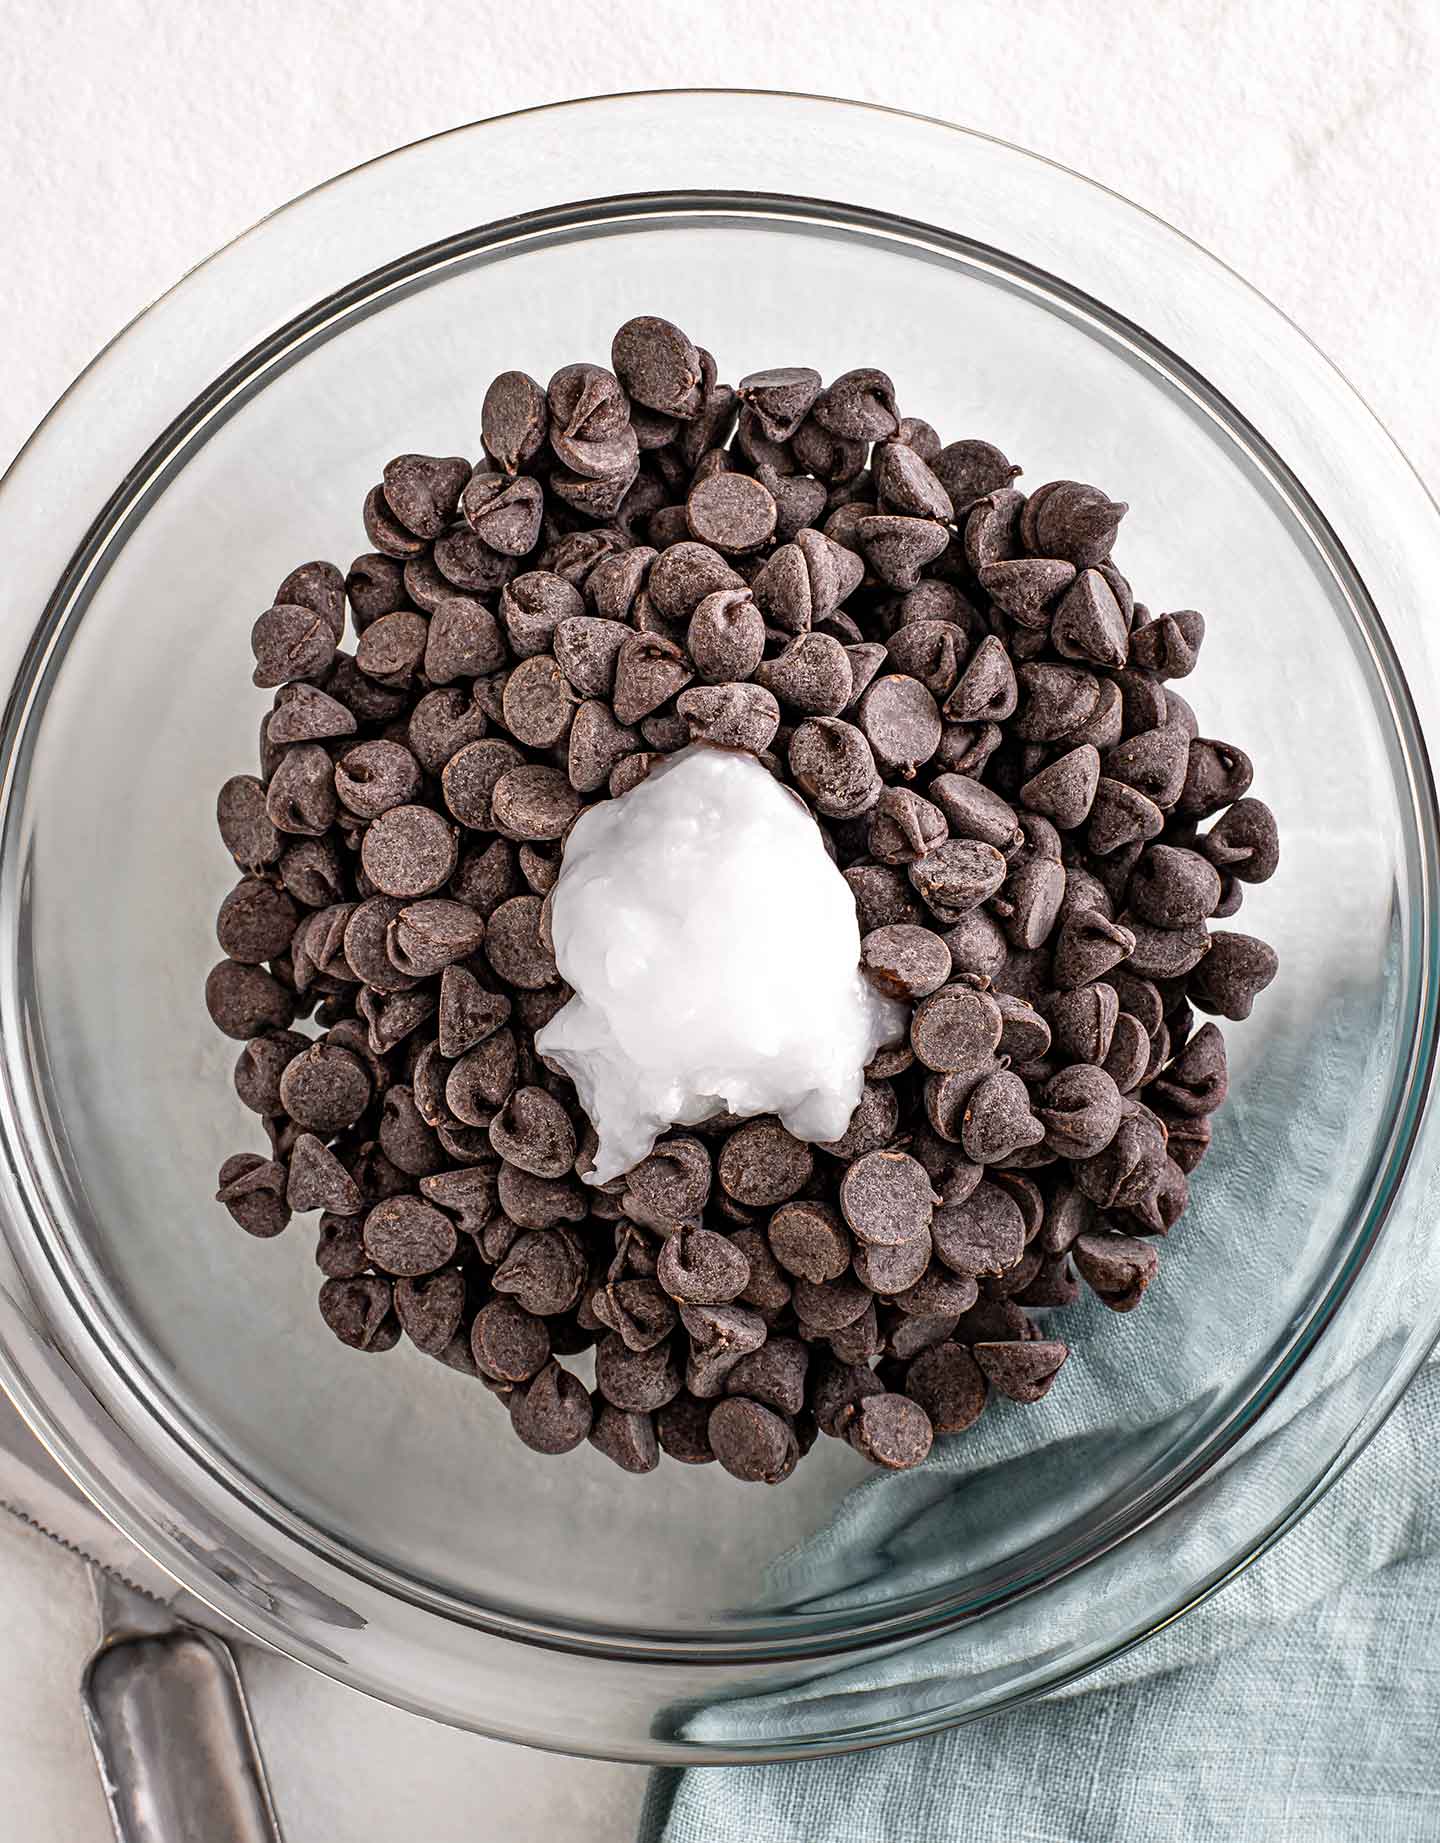 Top down view of chocolate chips in a glass bowl with a scoop of coconut oil in the middle.